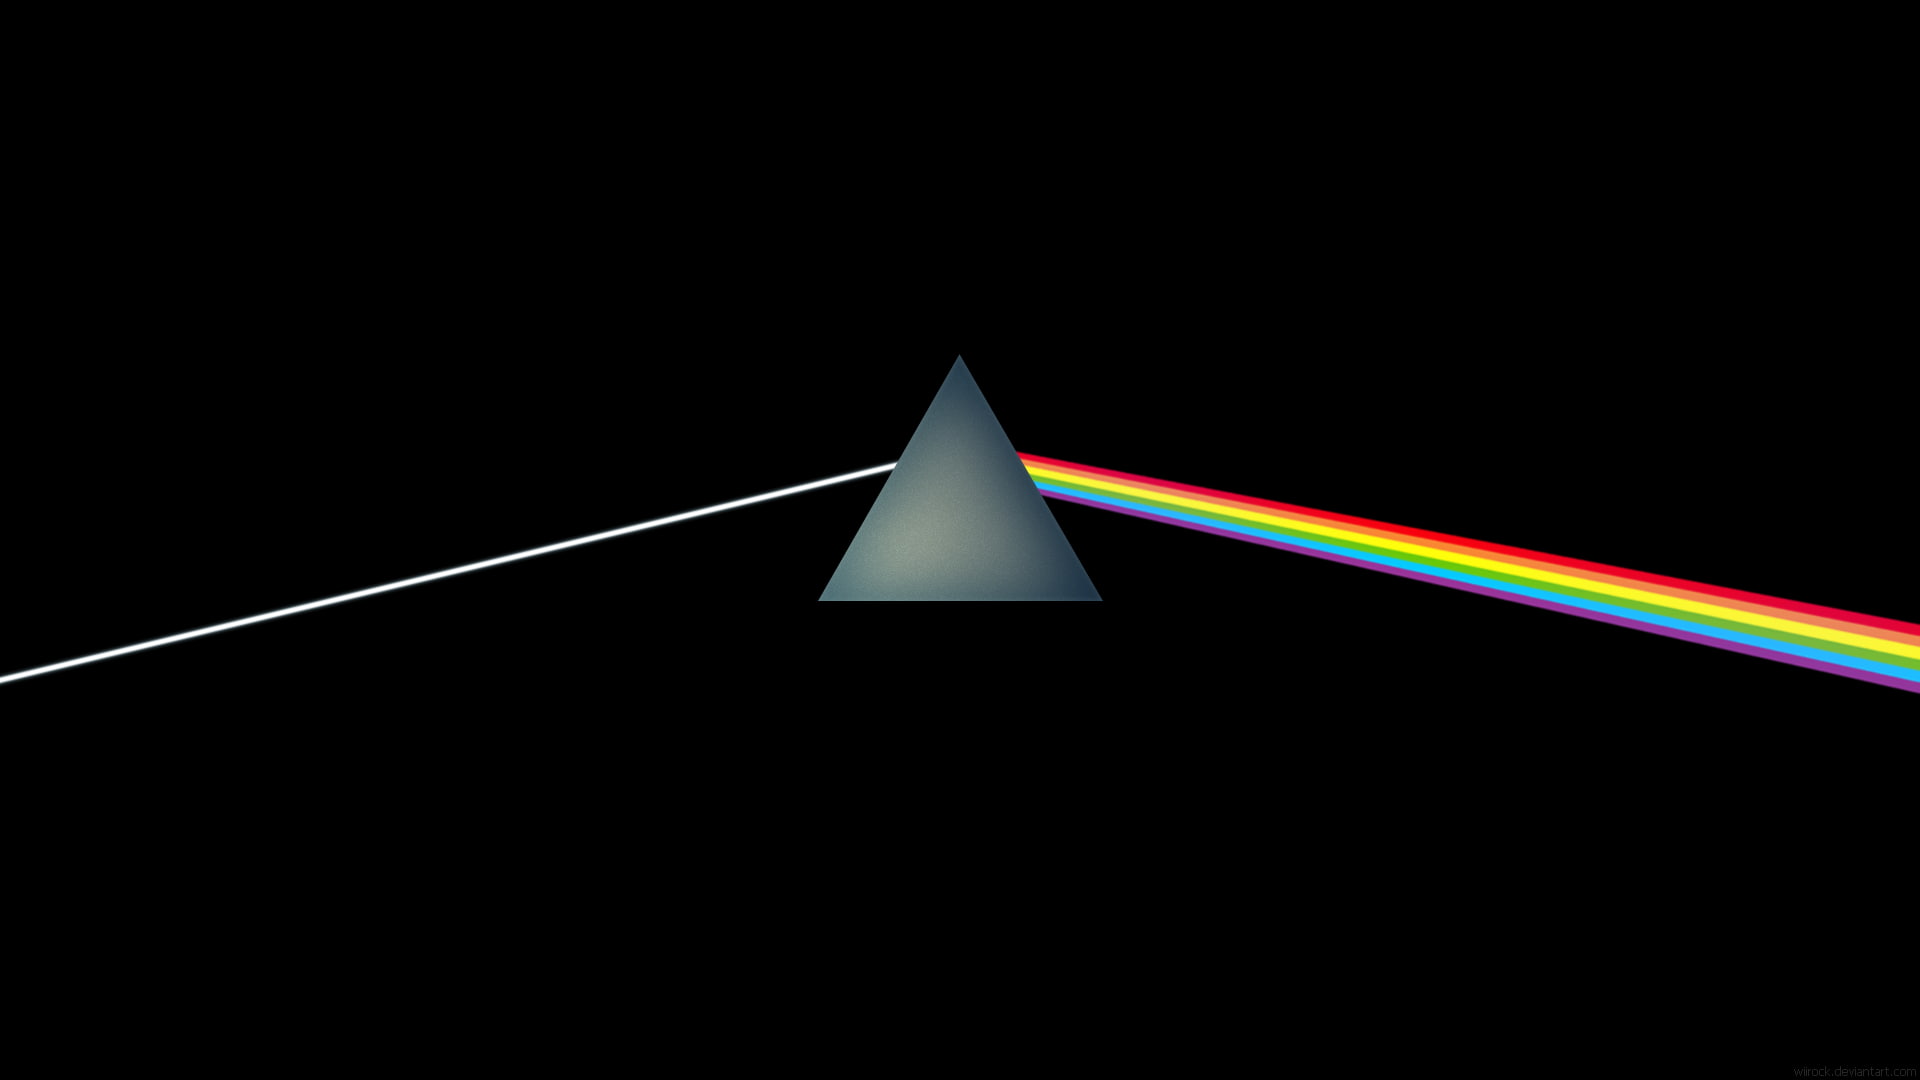 pink floyd pictures  for desktop, triangle shape, illuminated